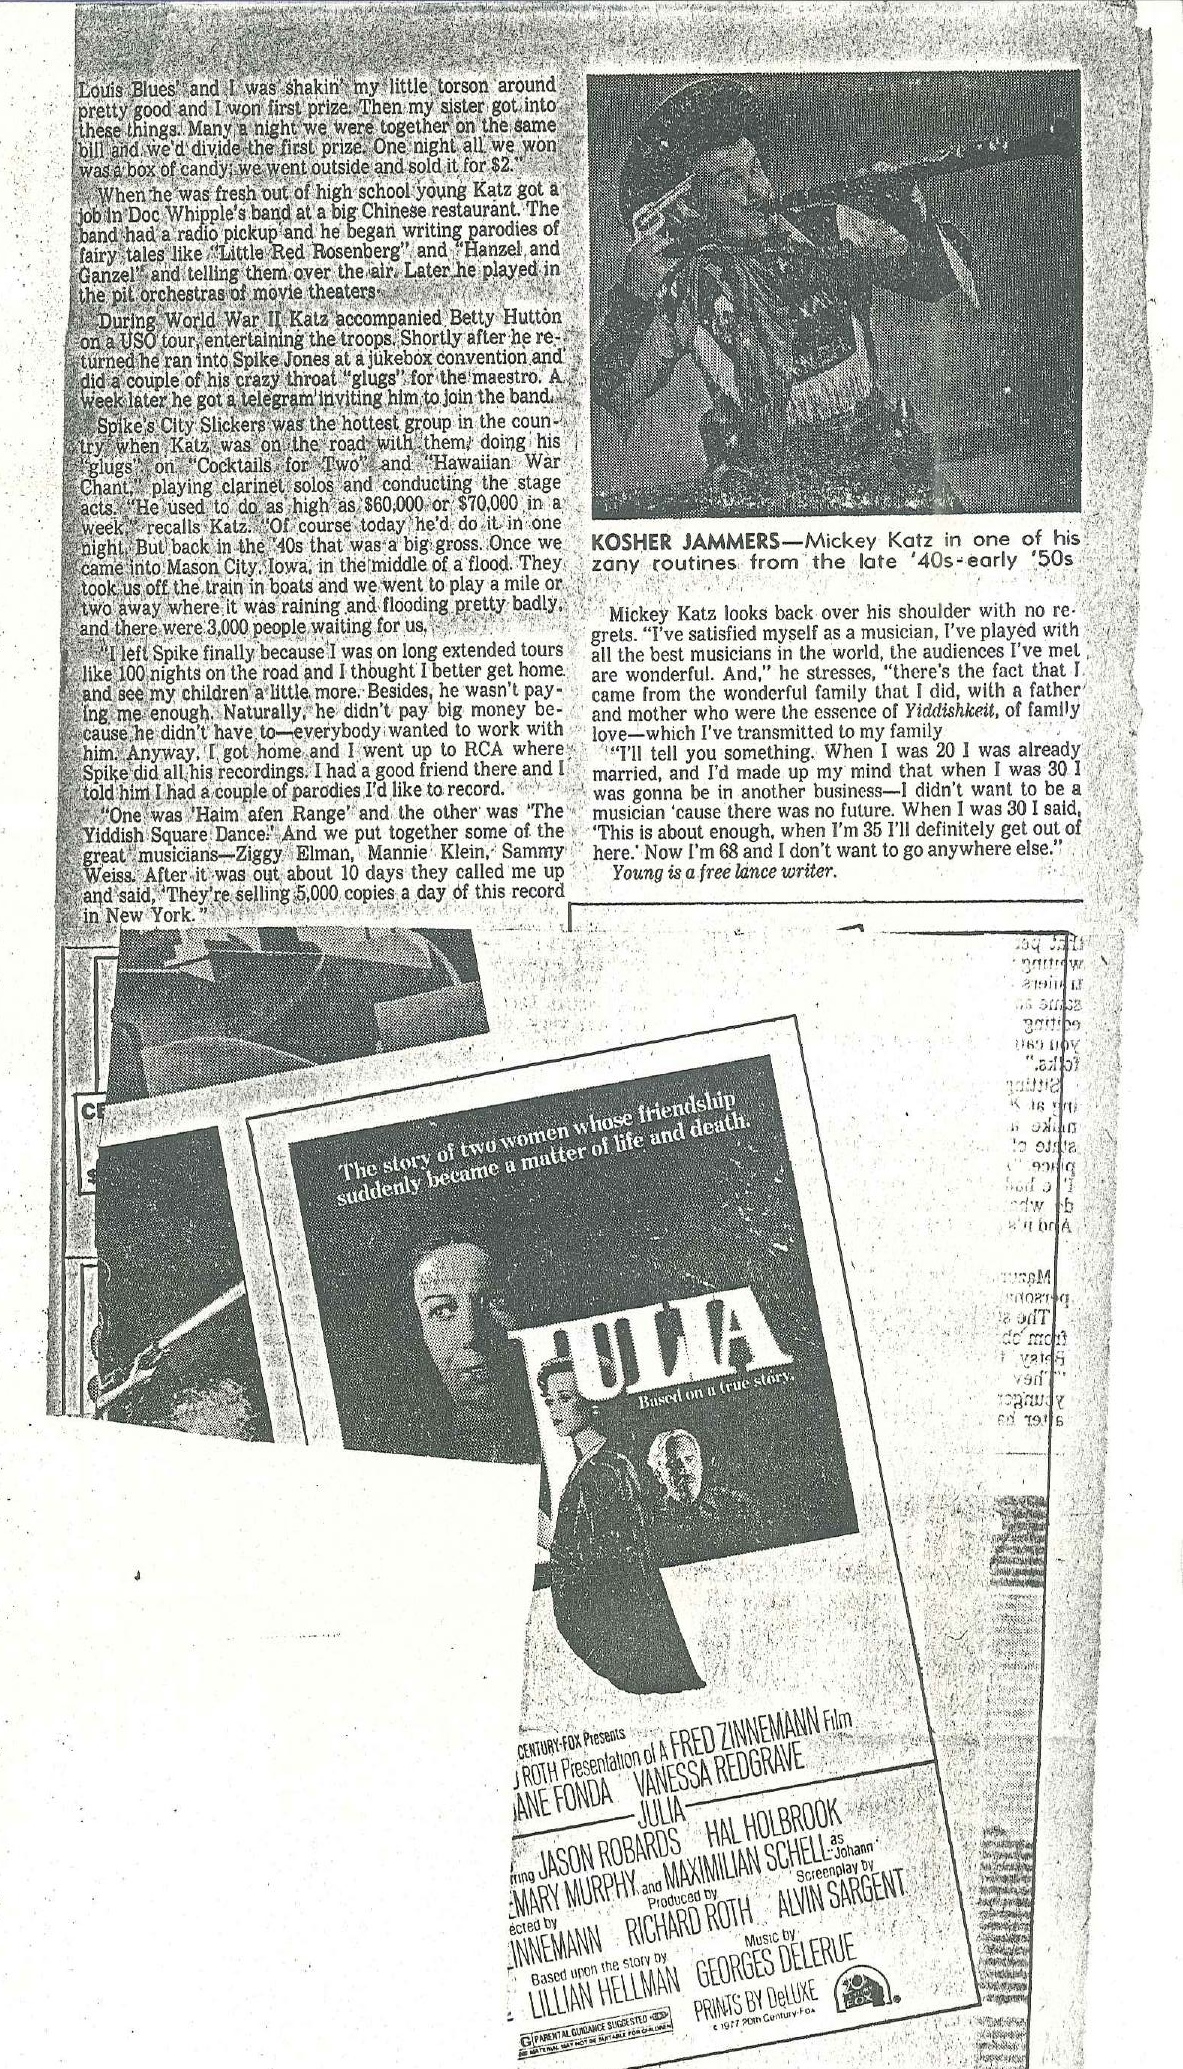 0020NC_Alternate copy of NC17, Clipping of a bio on M.Katz by Young Maybe related to NC22_Clippings